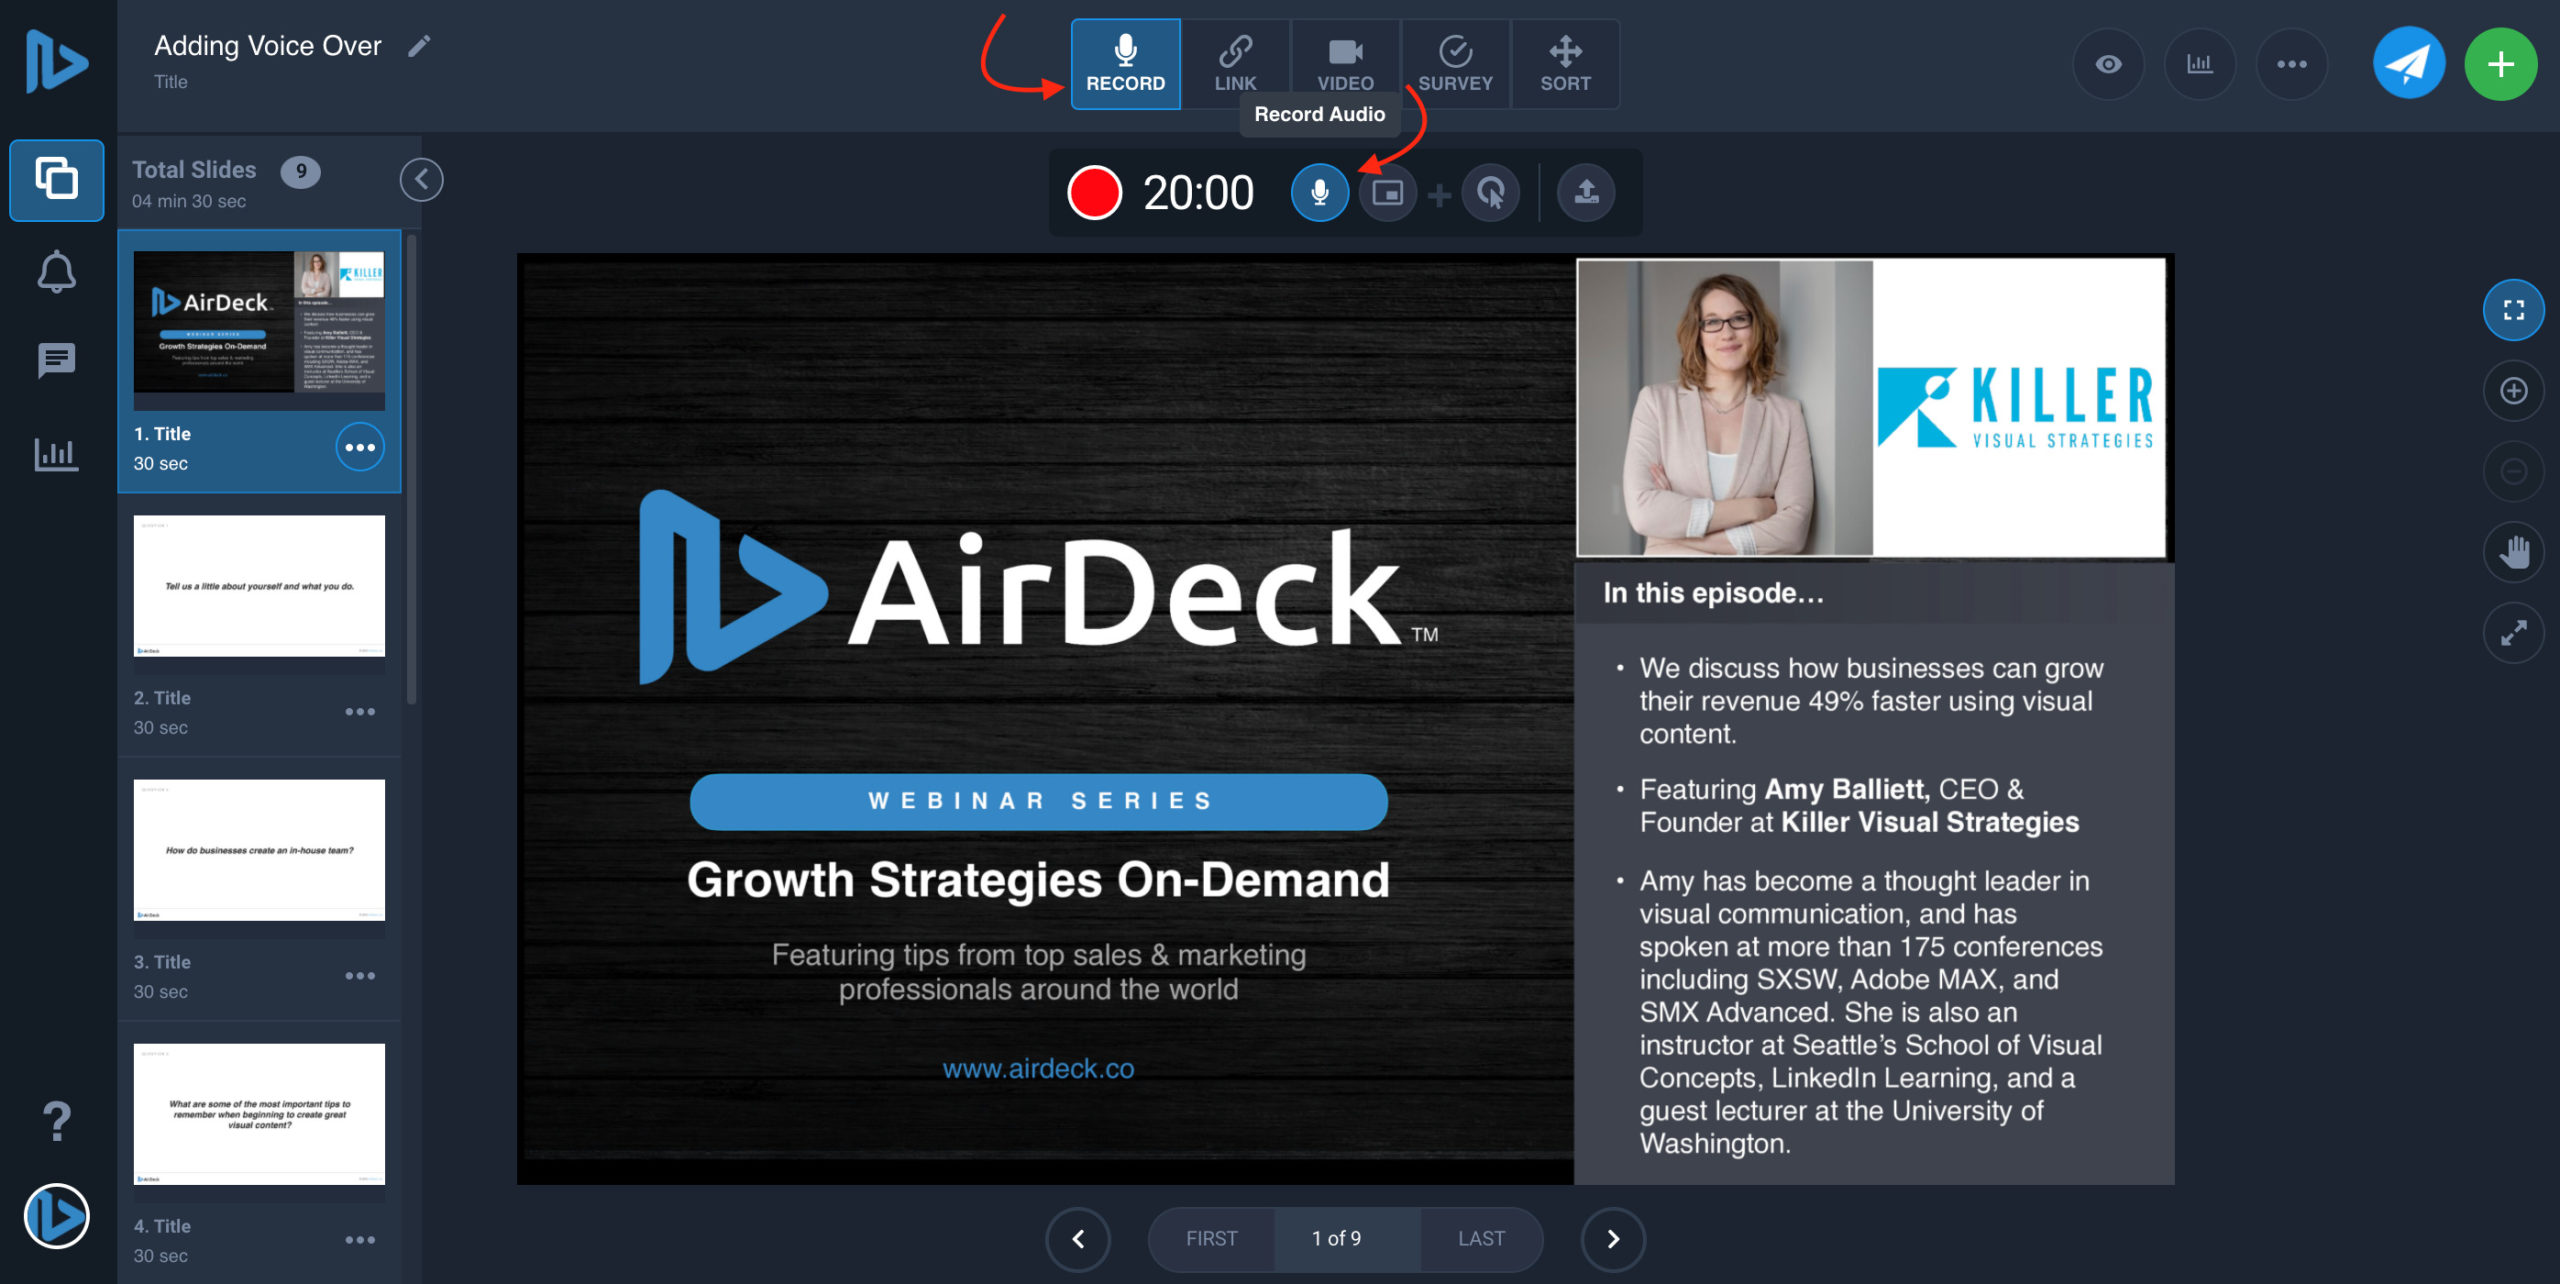 Arrow pointing to record button on AirDeck user interface